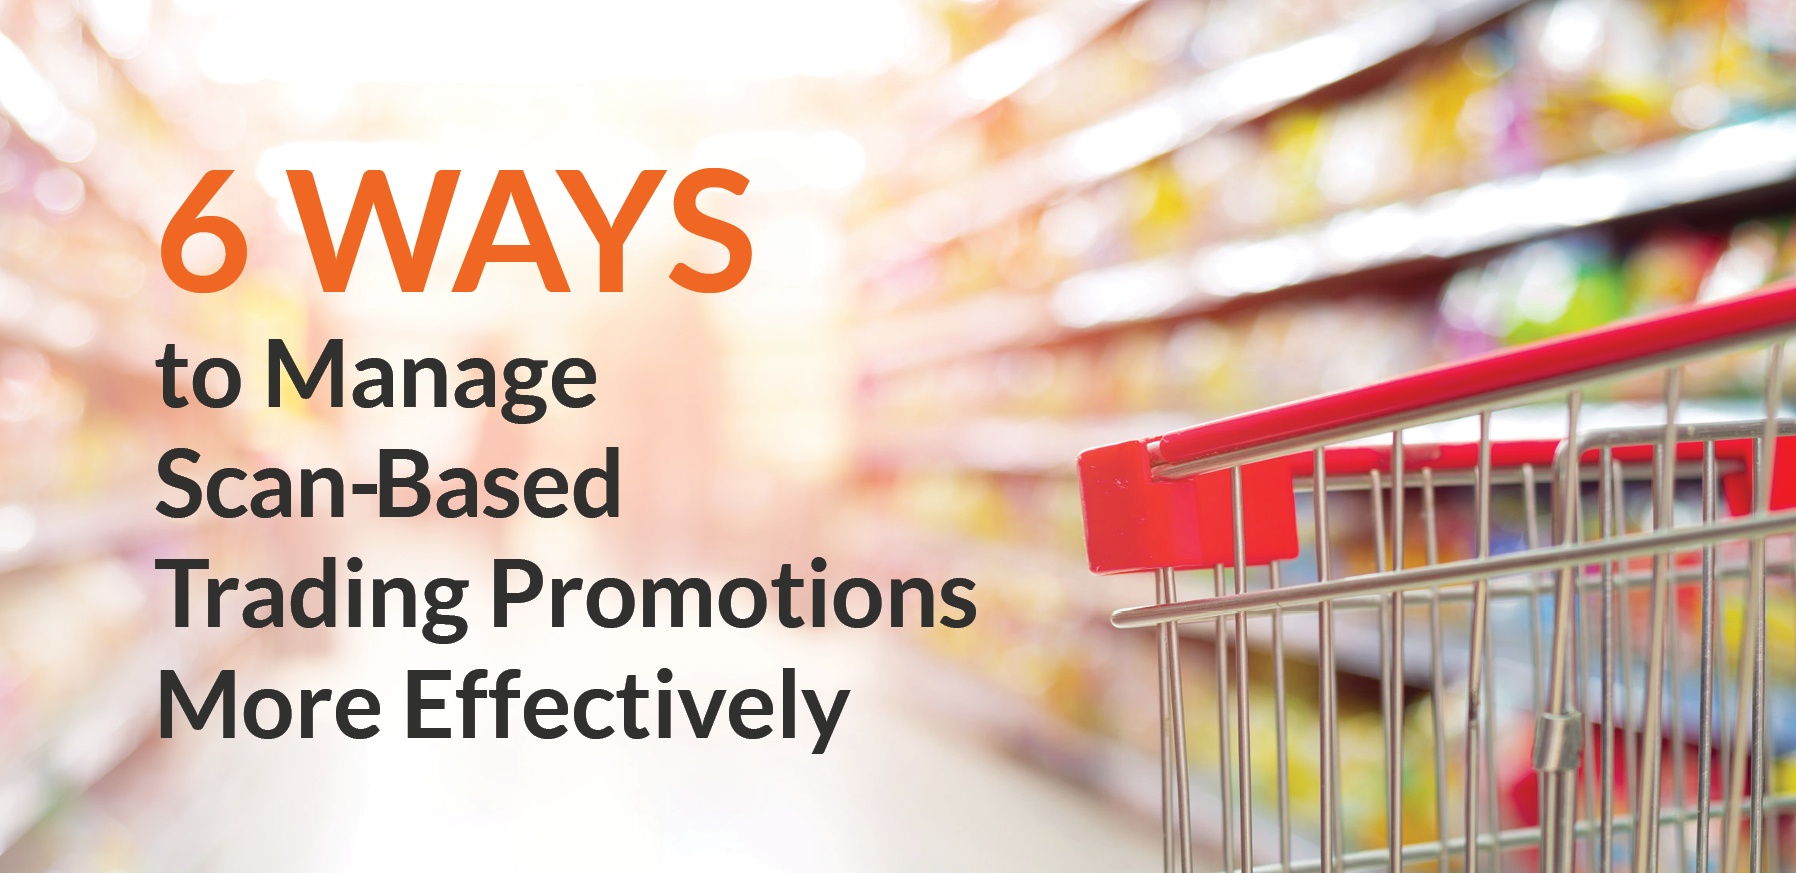 6 Ways to Manage ScanBased Trading Promotions More Effectively